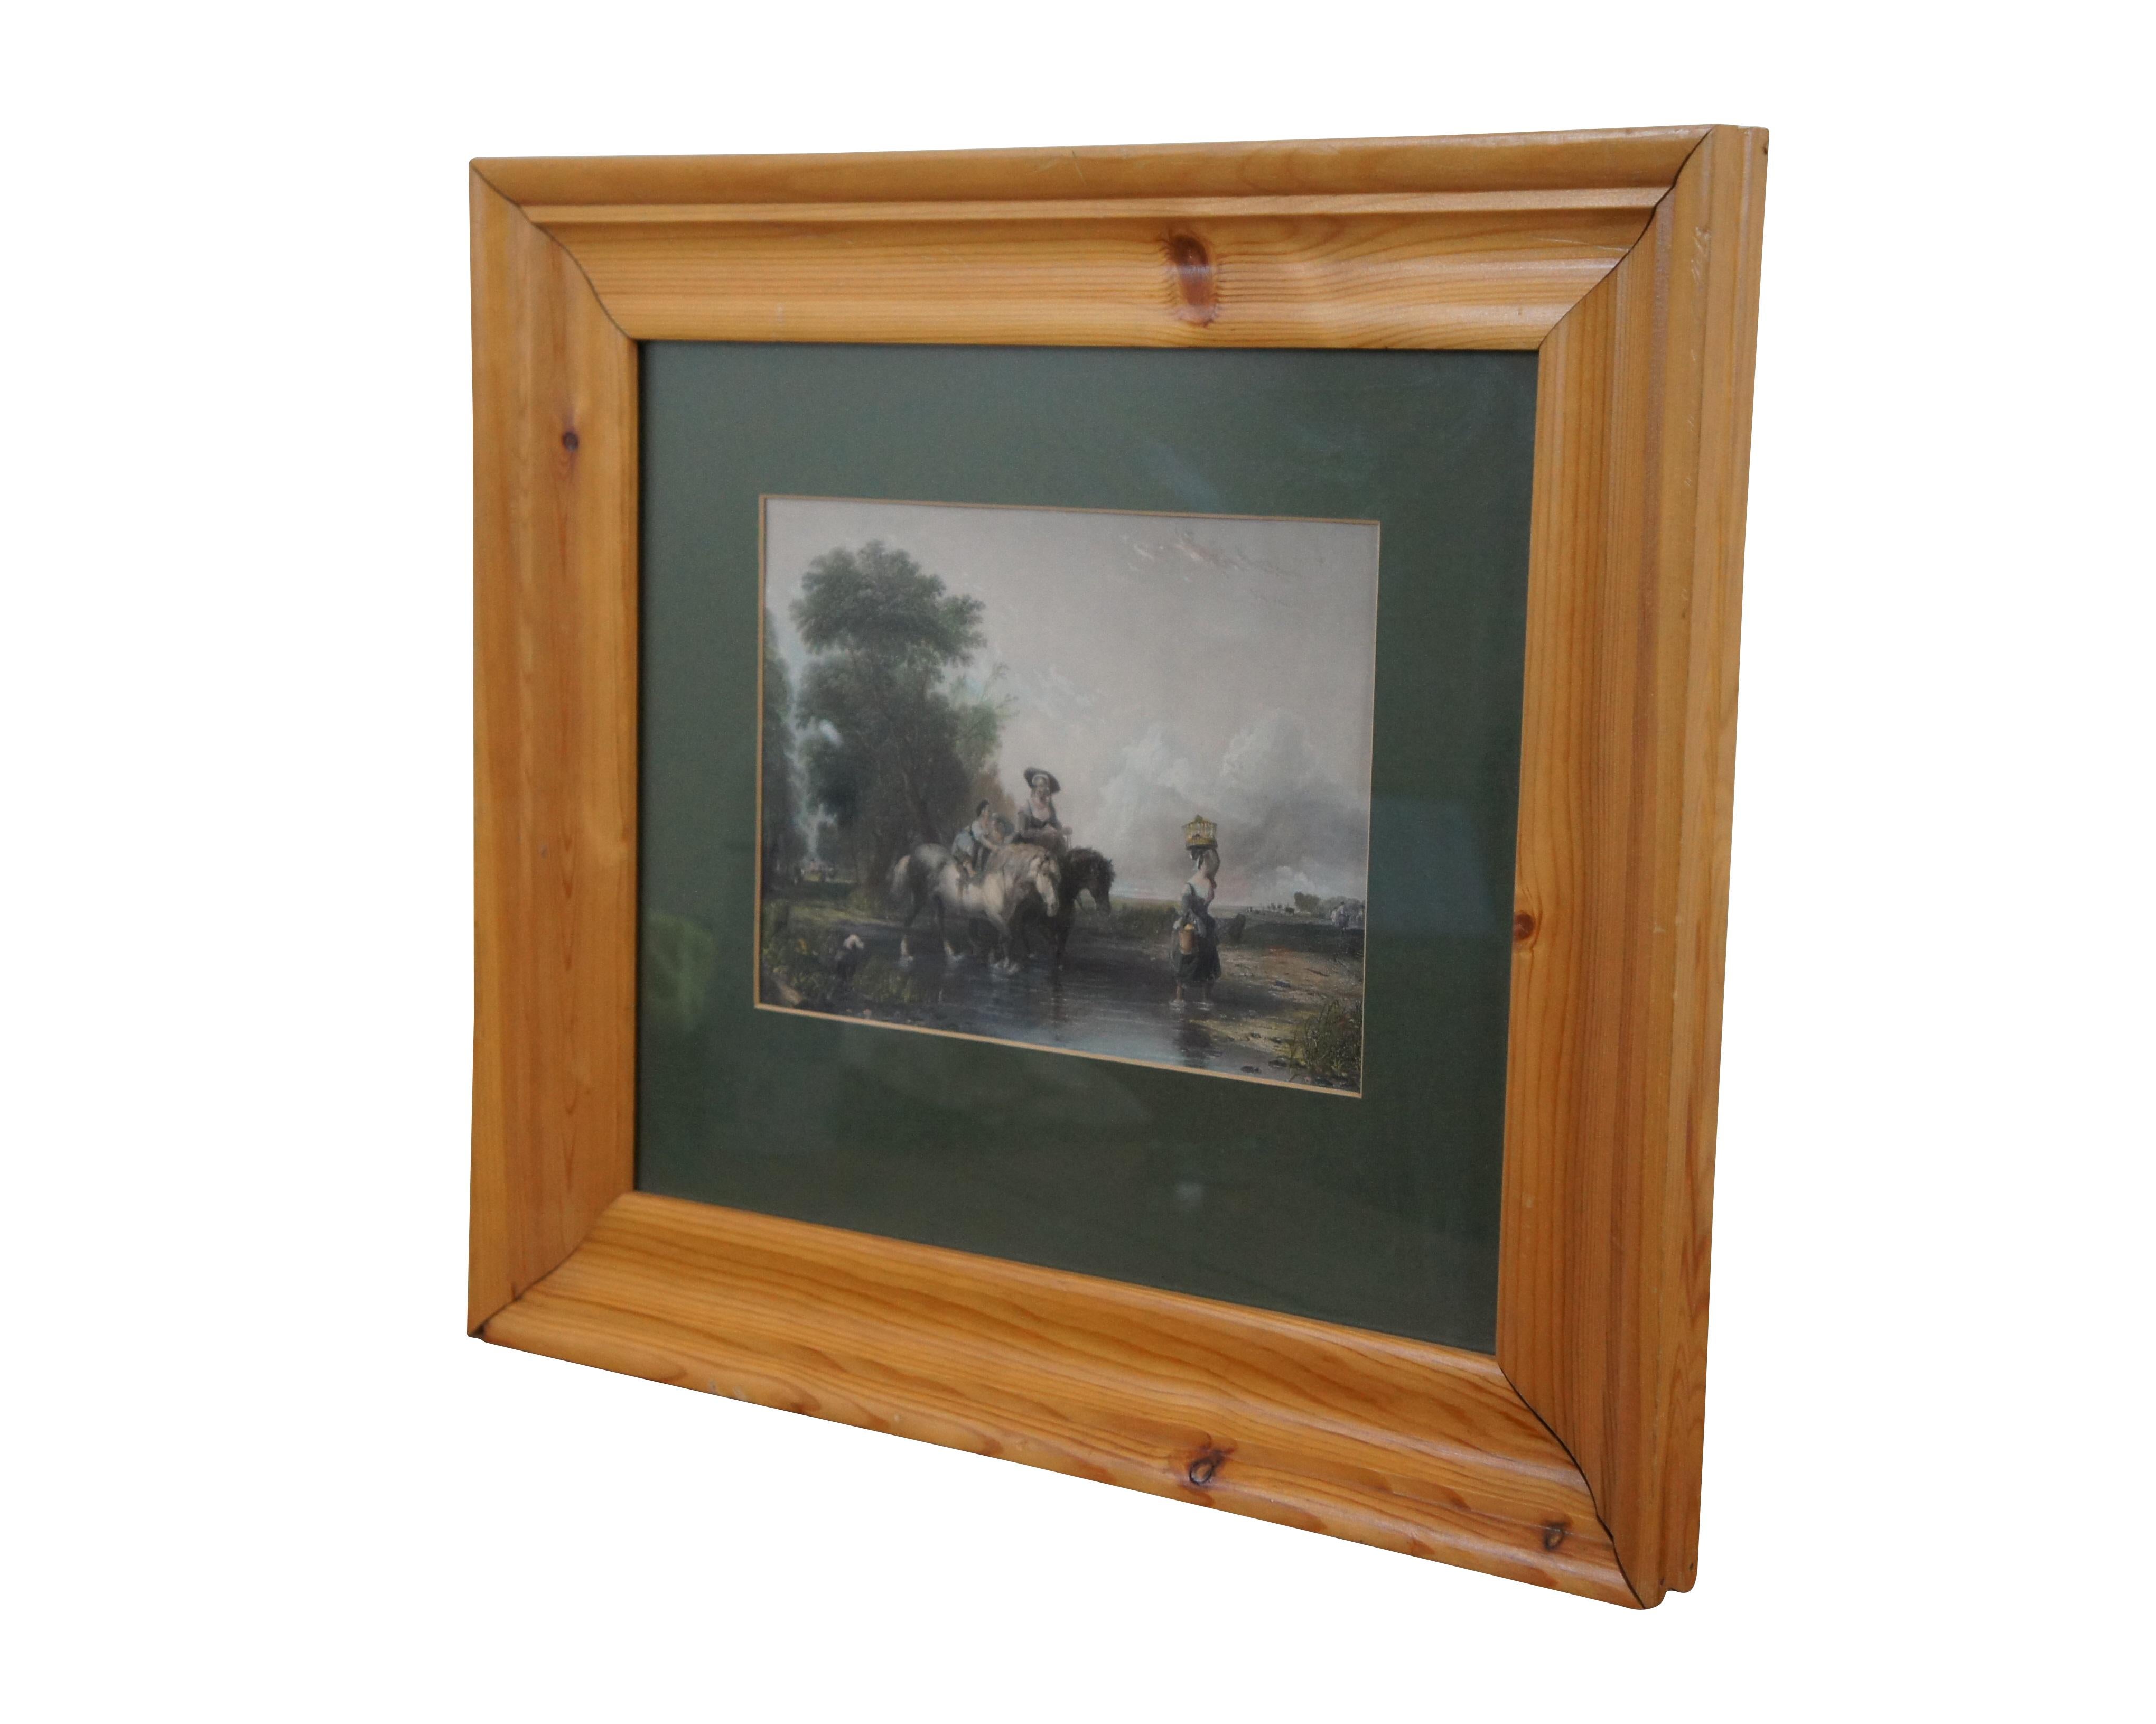 Framed late 19th century hand colored engraving titled 